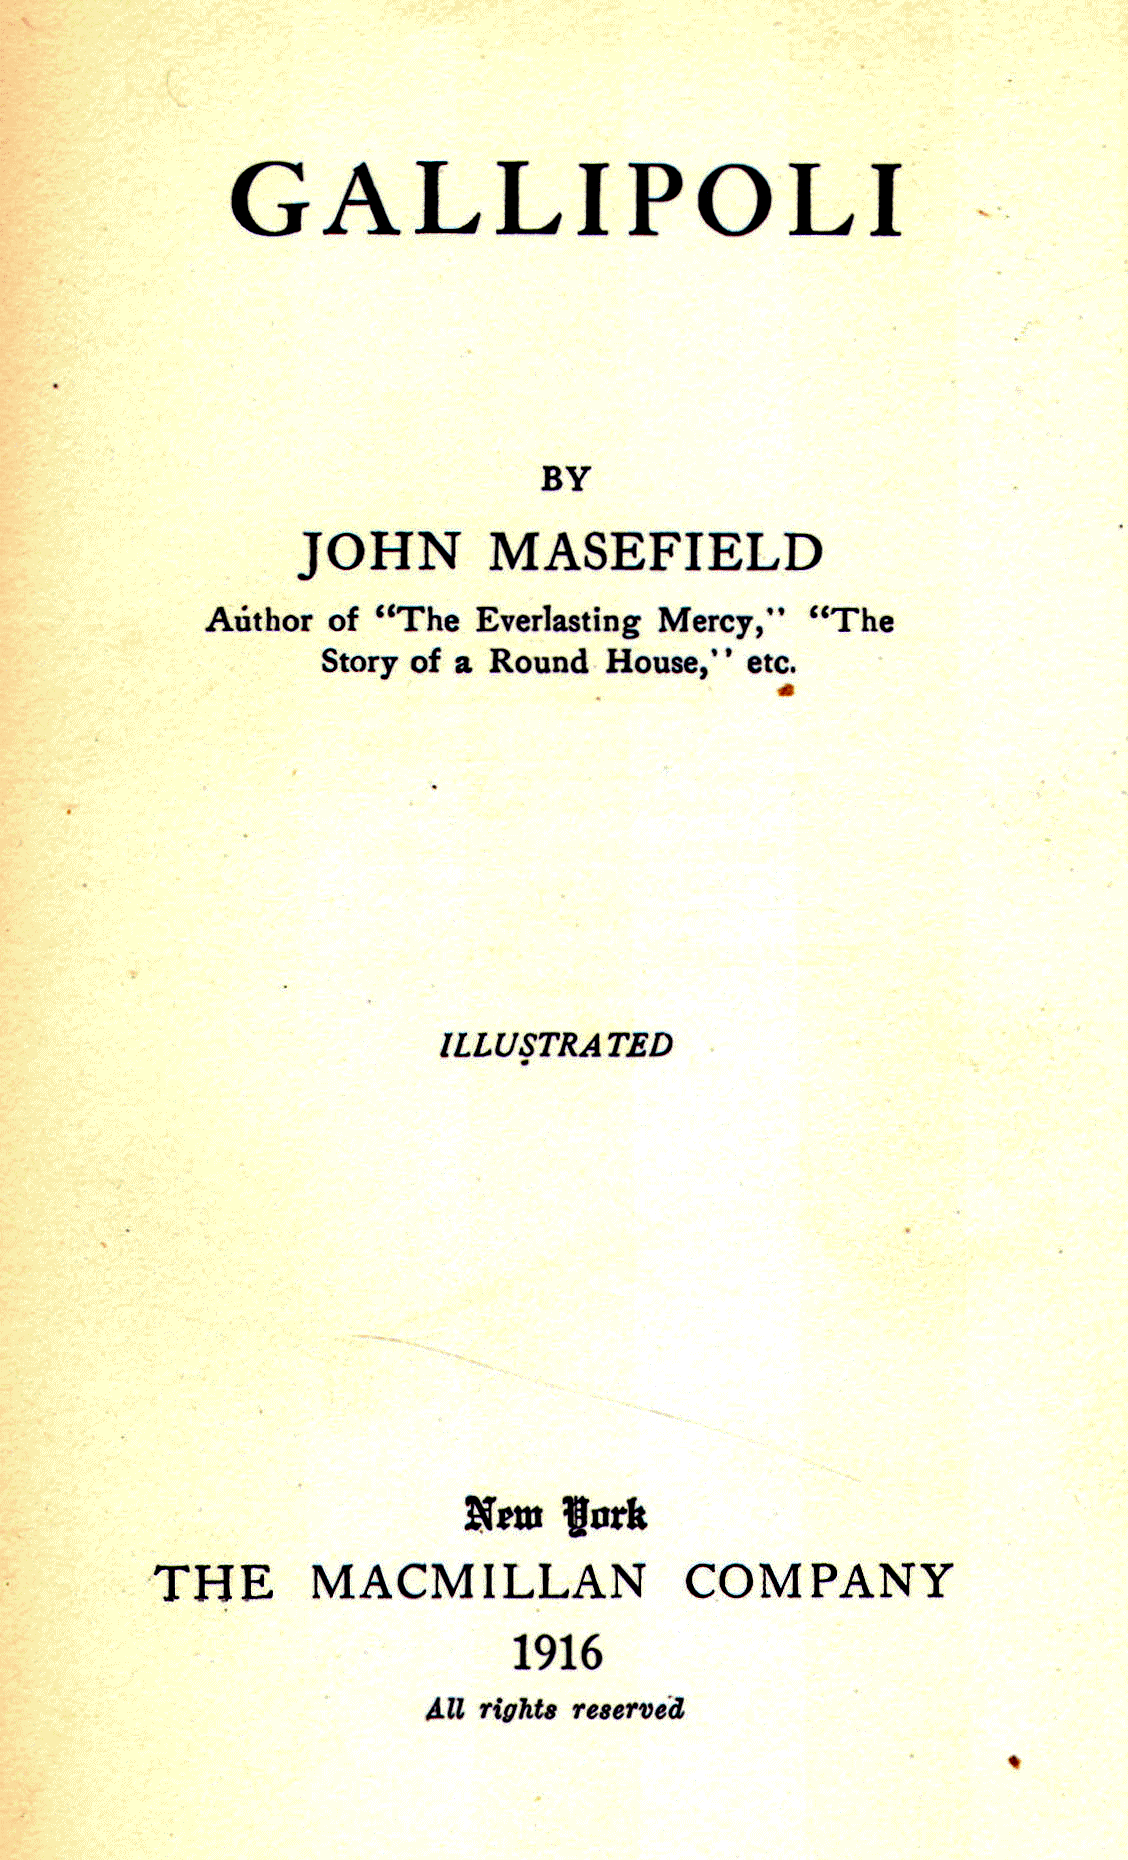 [Title Page] from Gallipoli by John Masefield